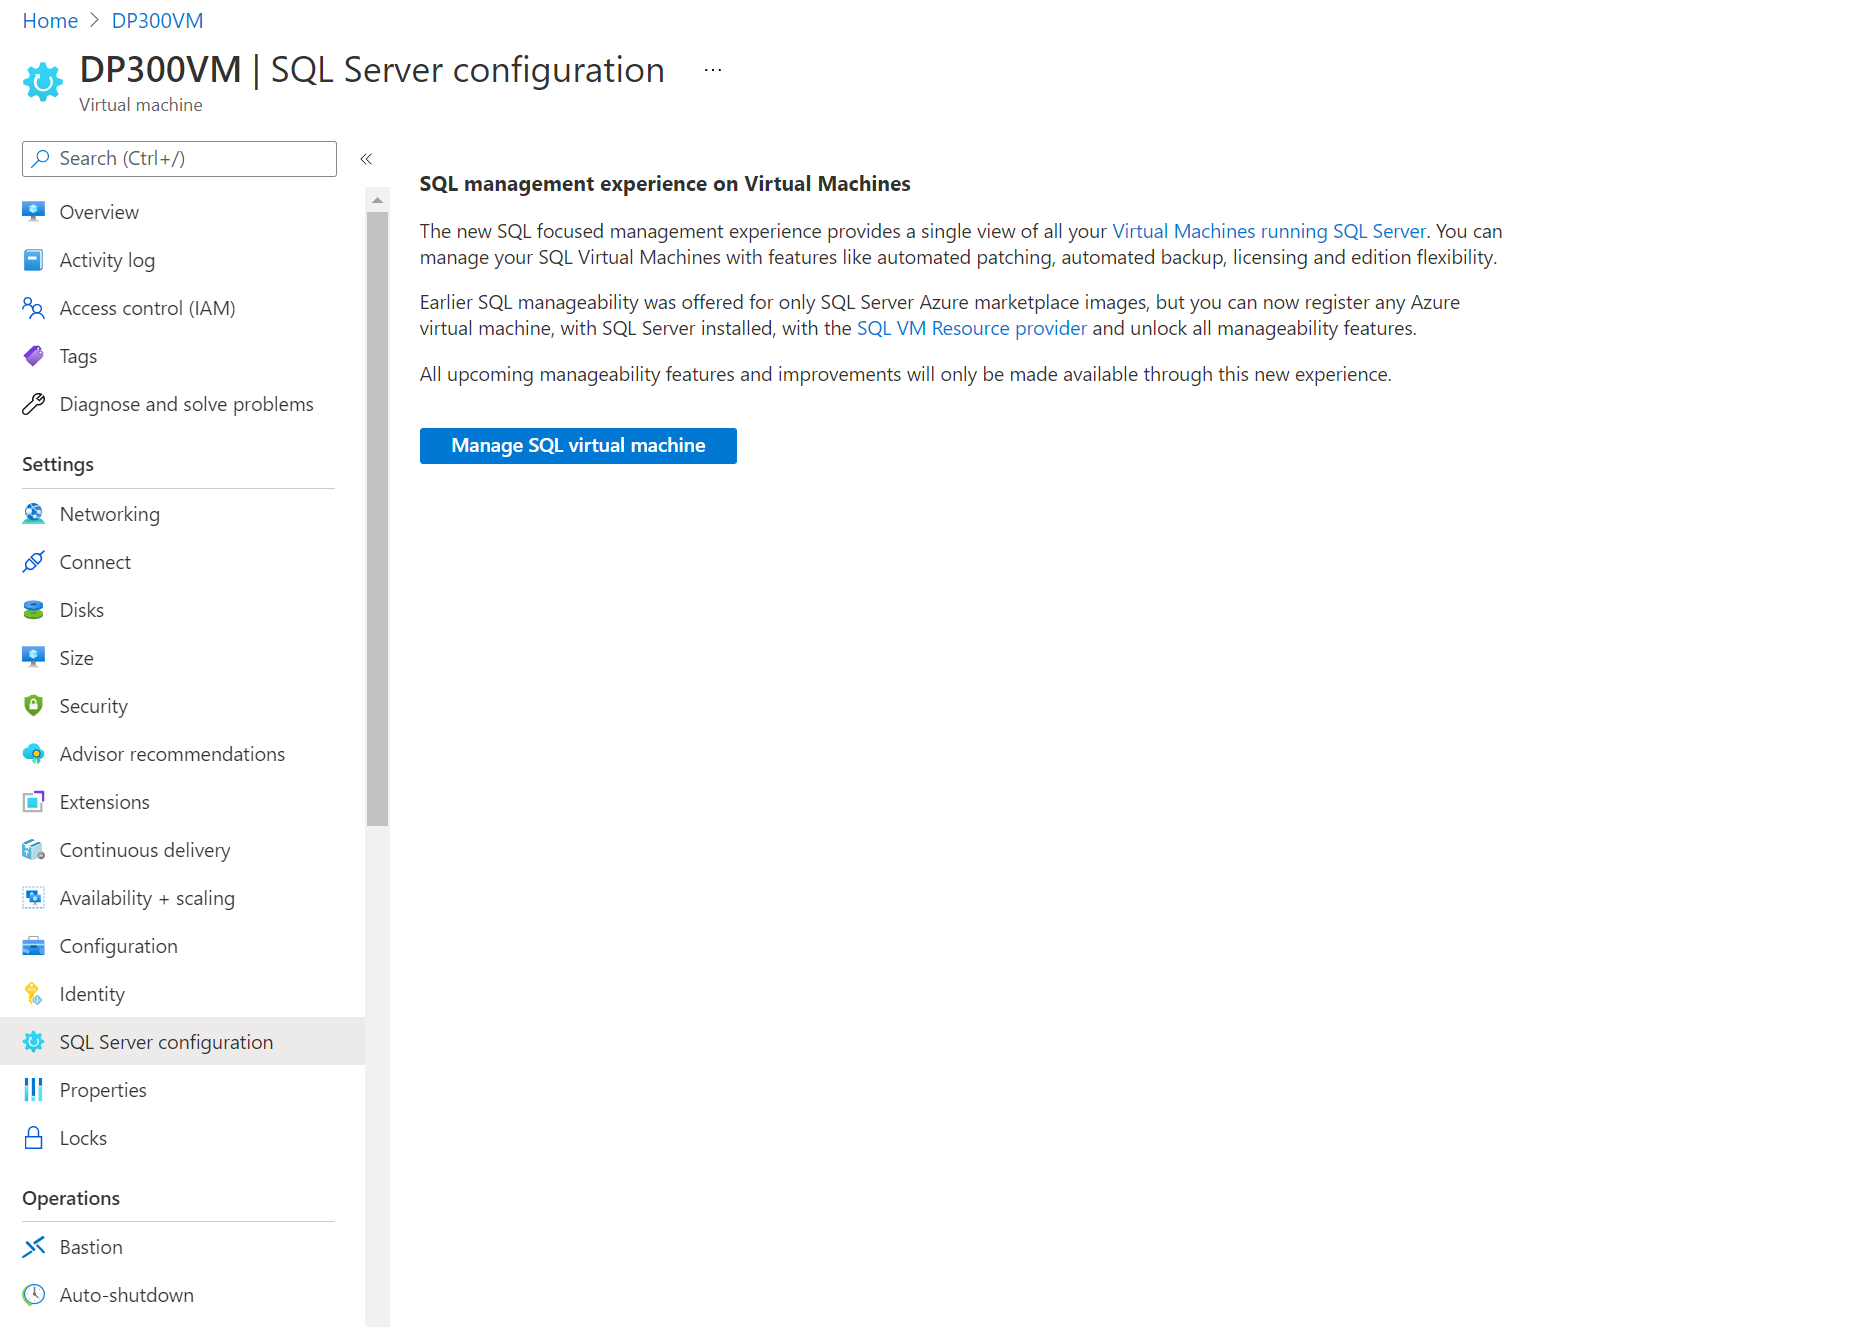 Screenshot of directions to register with SQL IaaS Agent Extension.